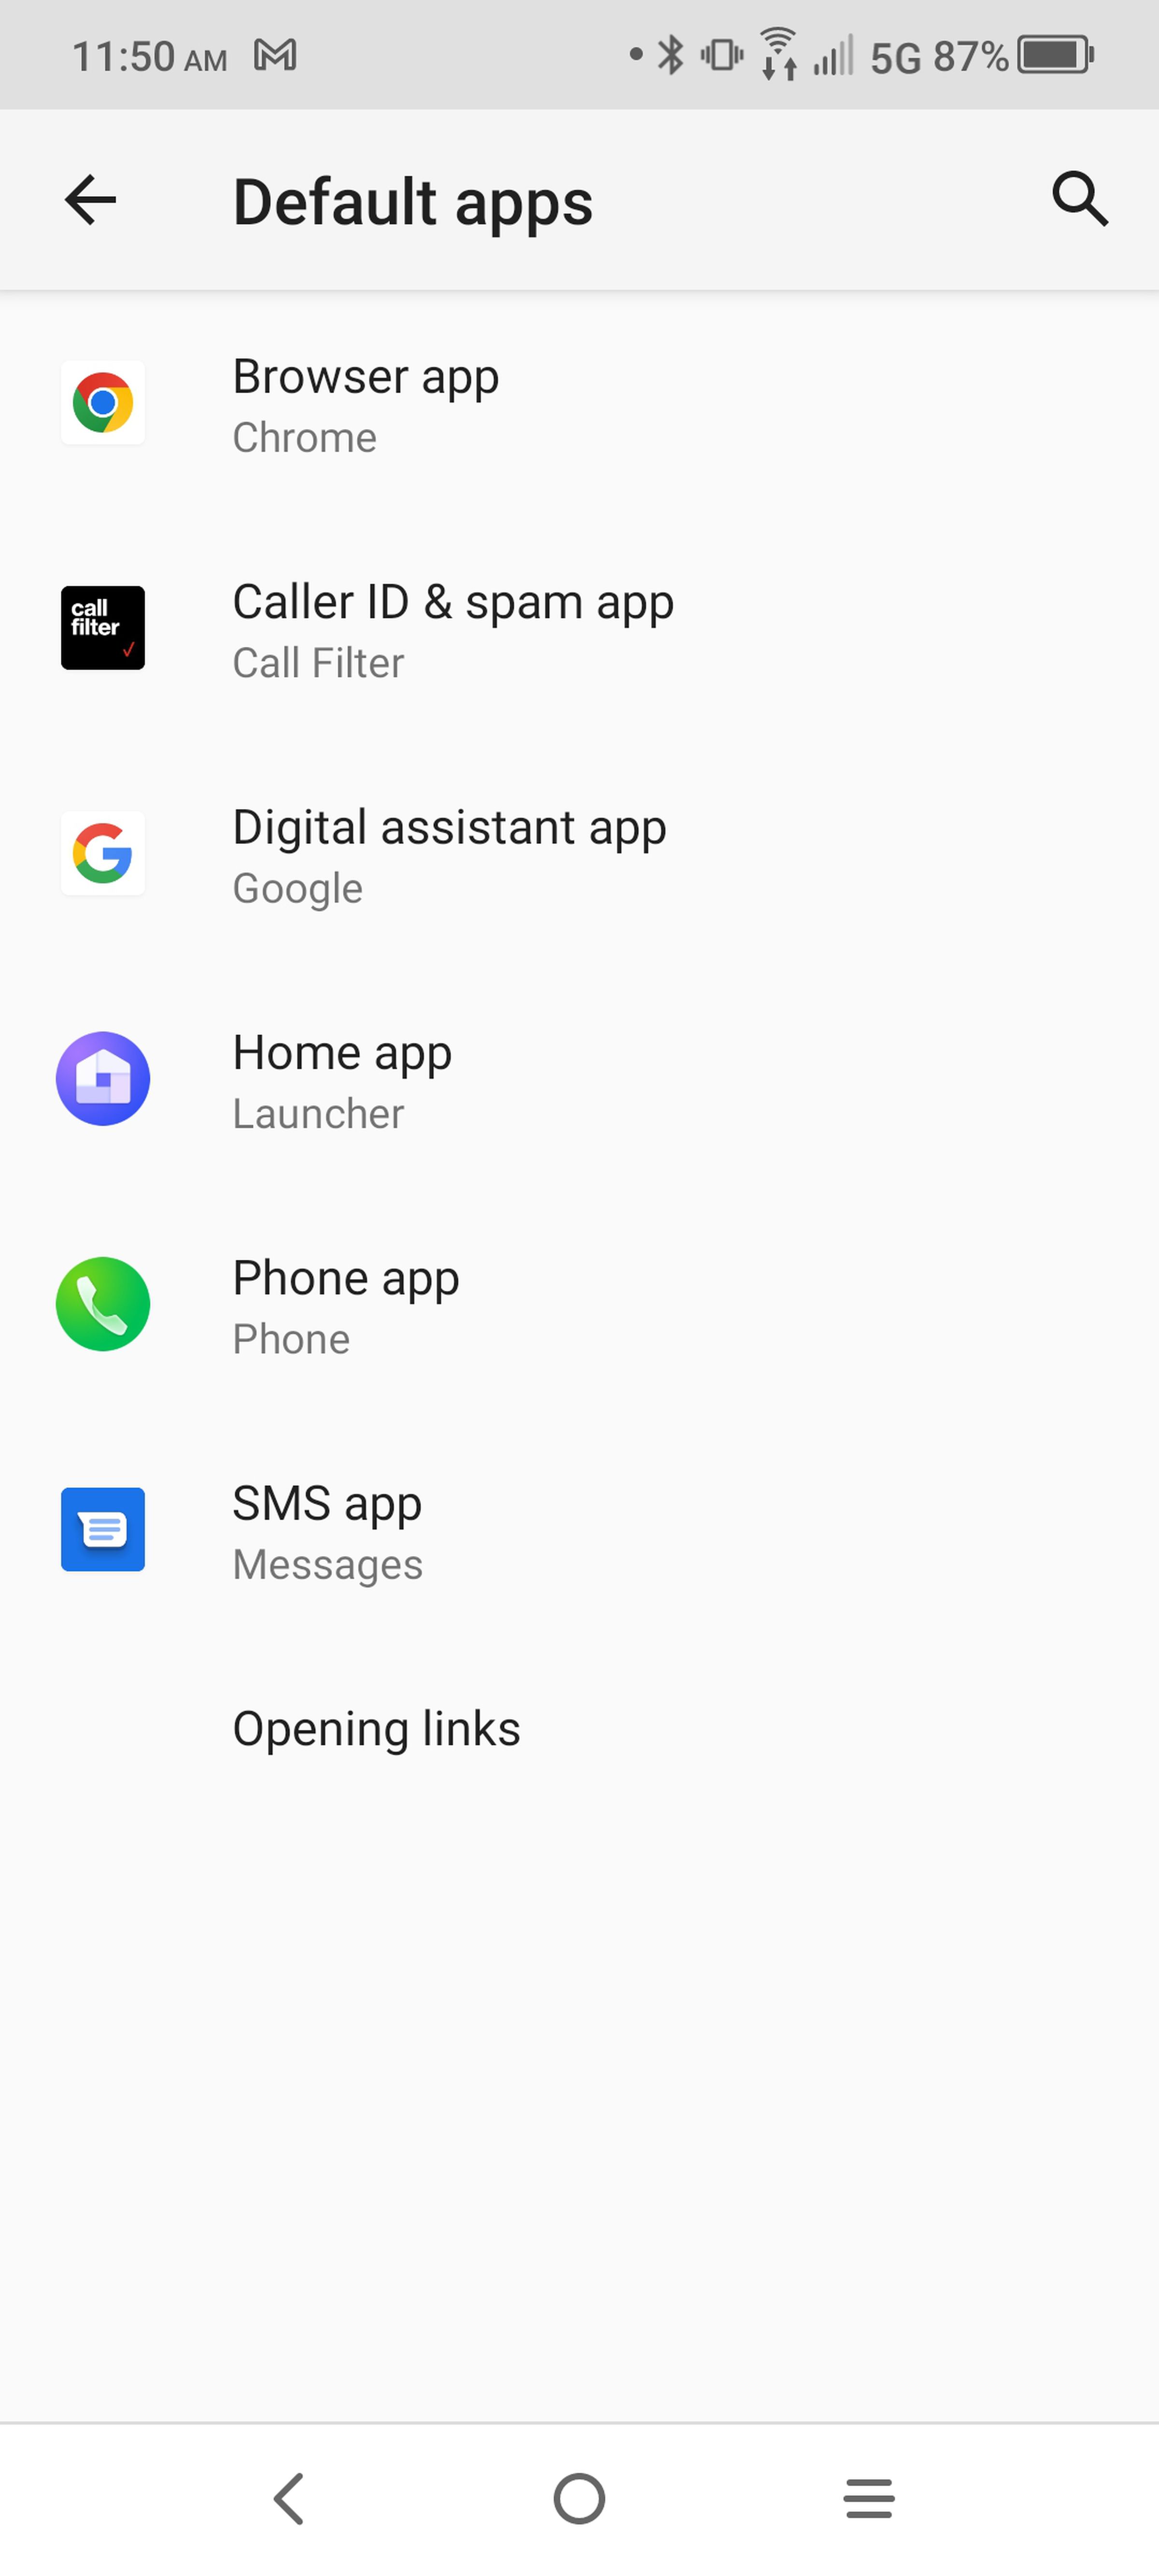 Change your browser, SMS app, and more from the default.